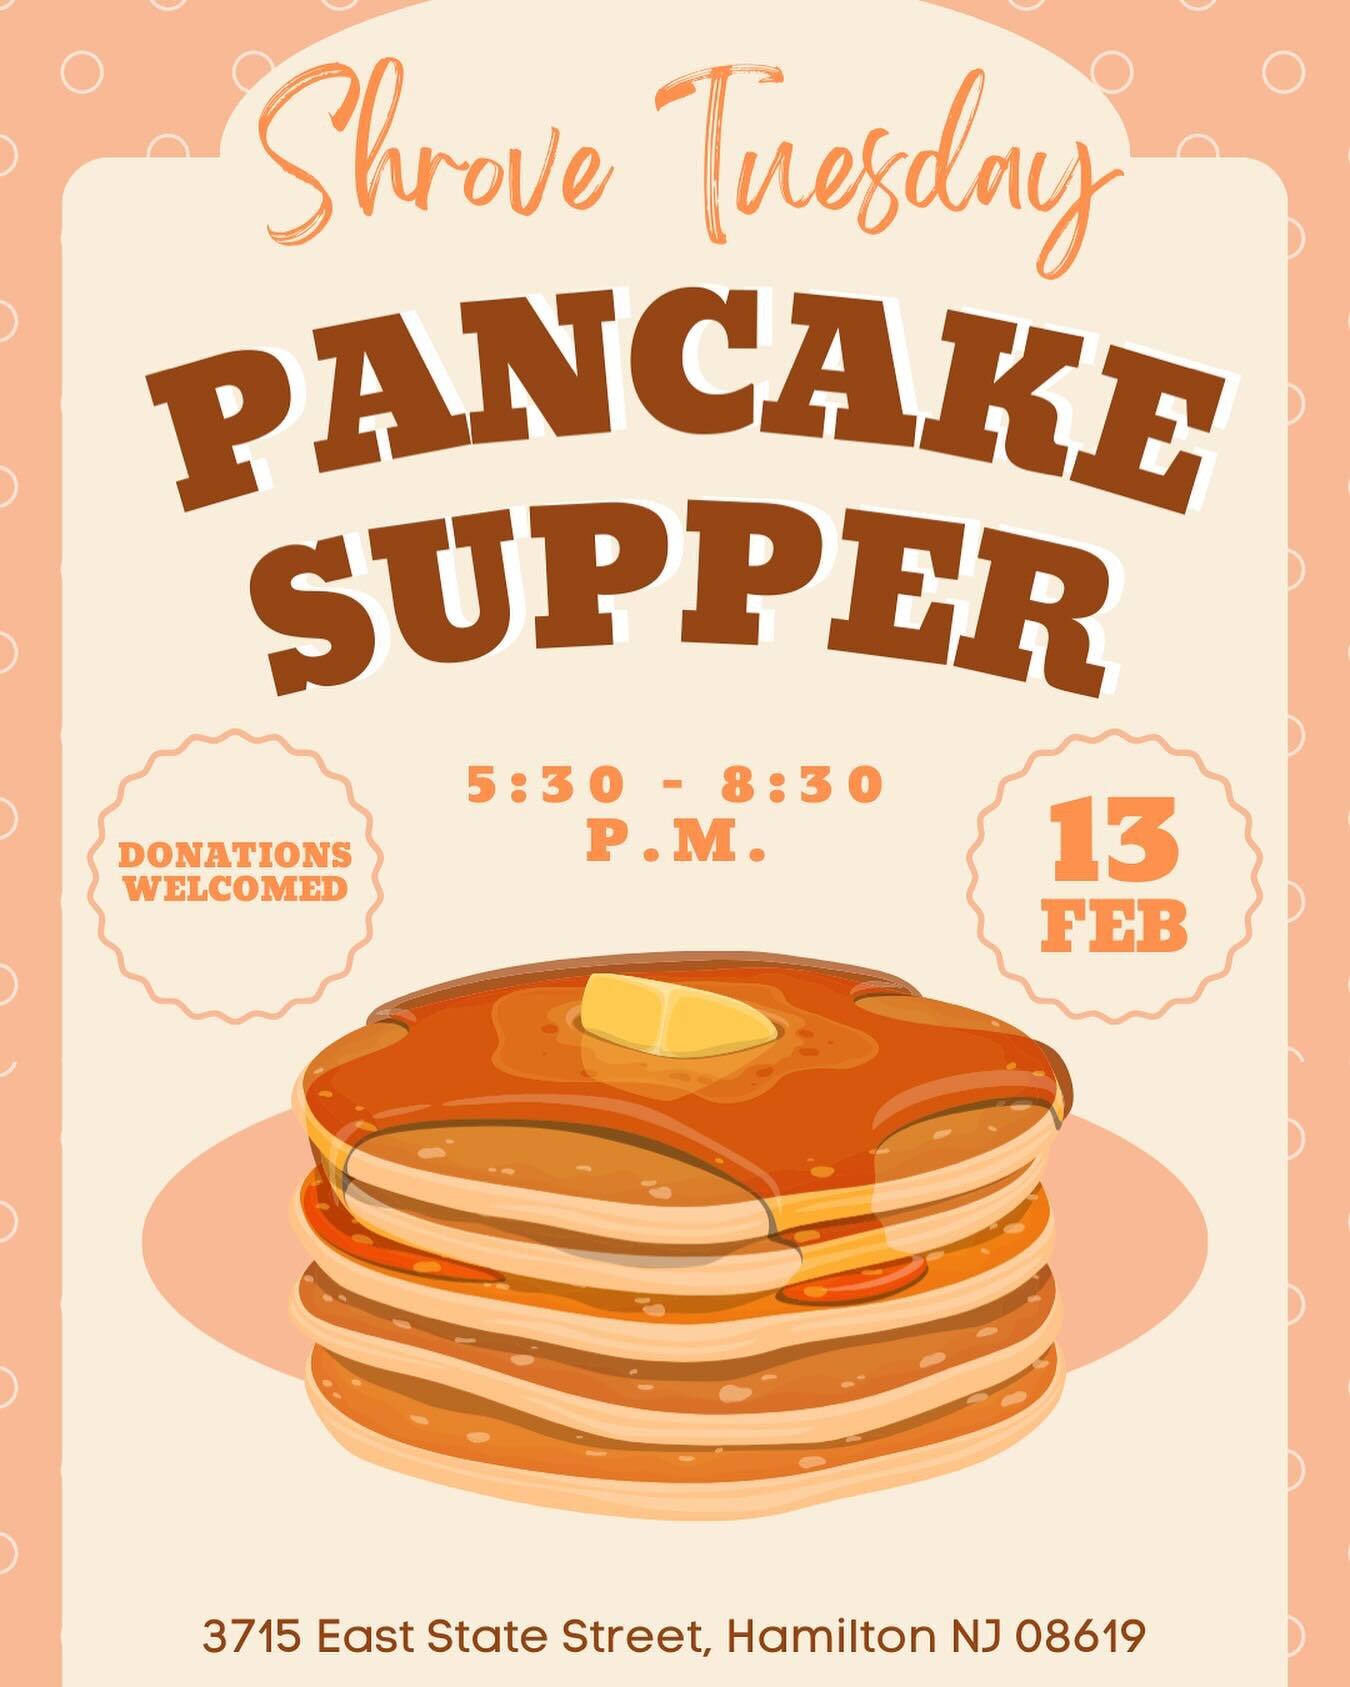 Please join us for our Shrove Tuesday Pancake Supper on Tuesday, February 13th from 5:30-8:30 p.m. We will have pancakes and toppings, plus bacon, sausage, and various drinks. Donations welcomed. See you then! 🥞